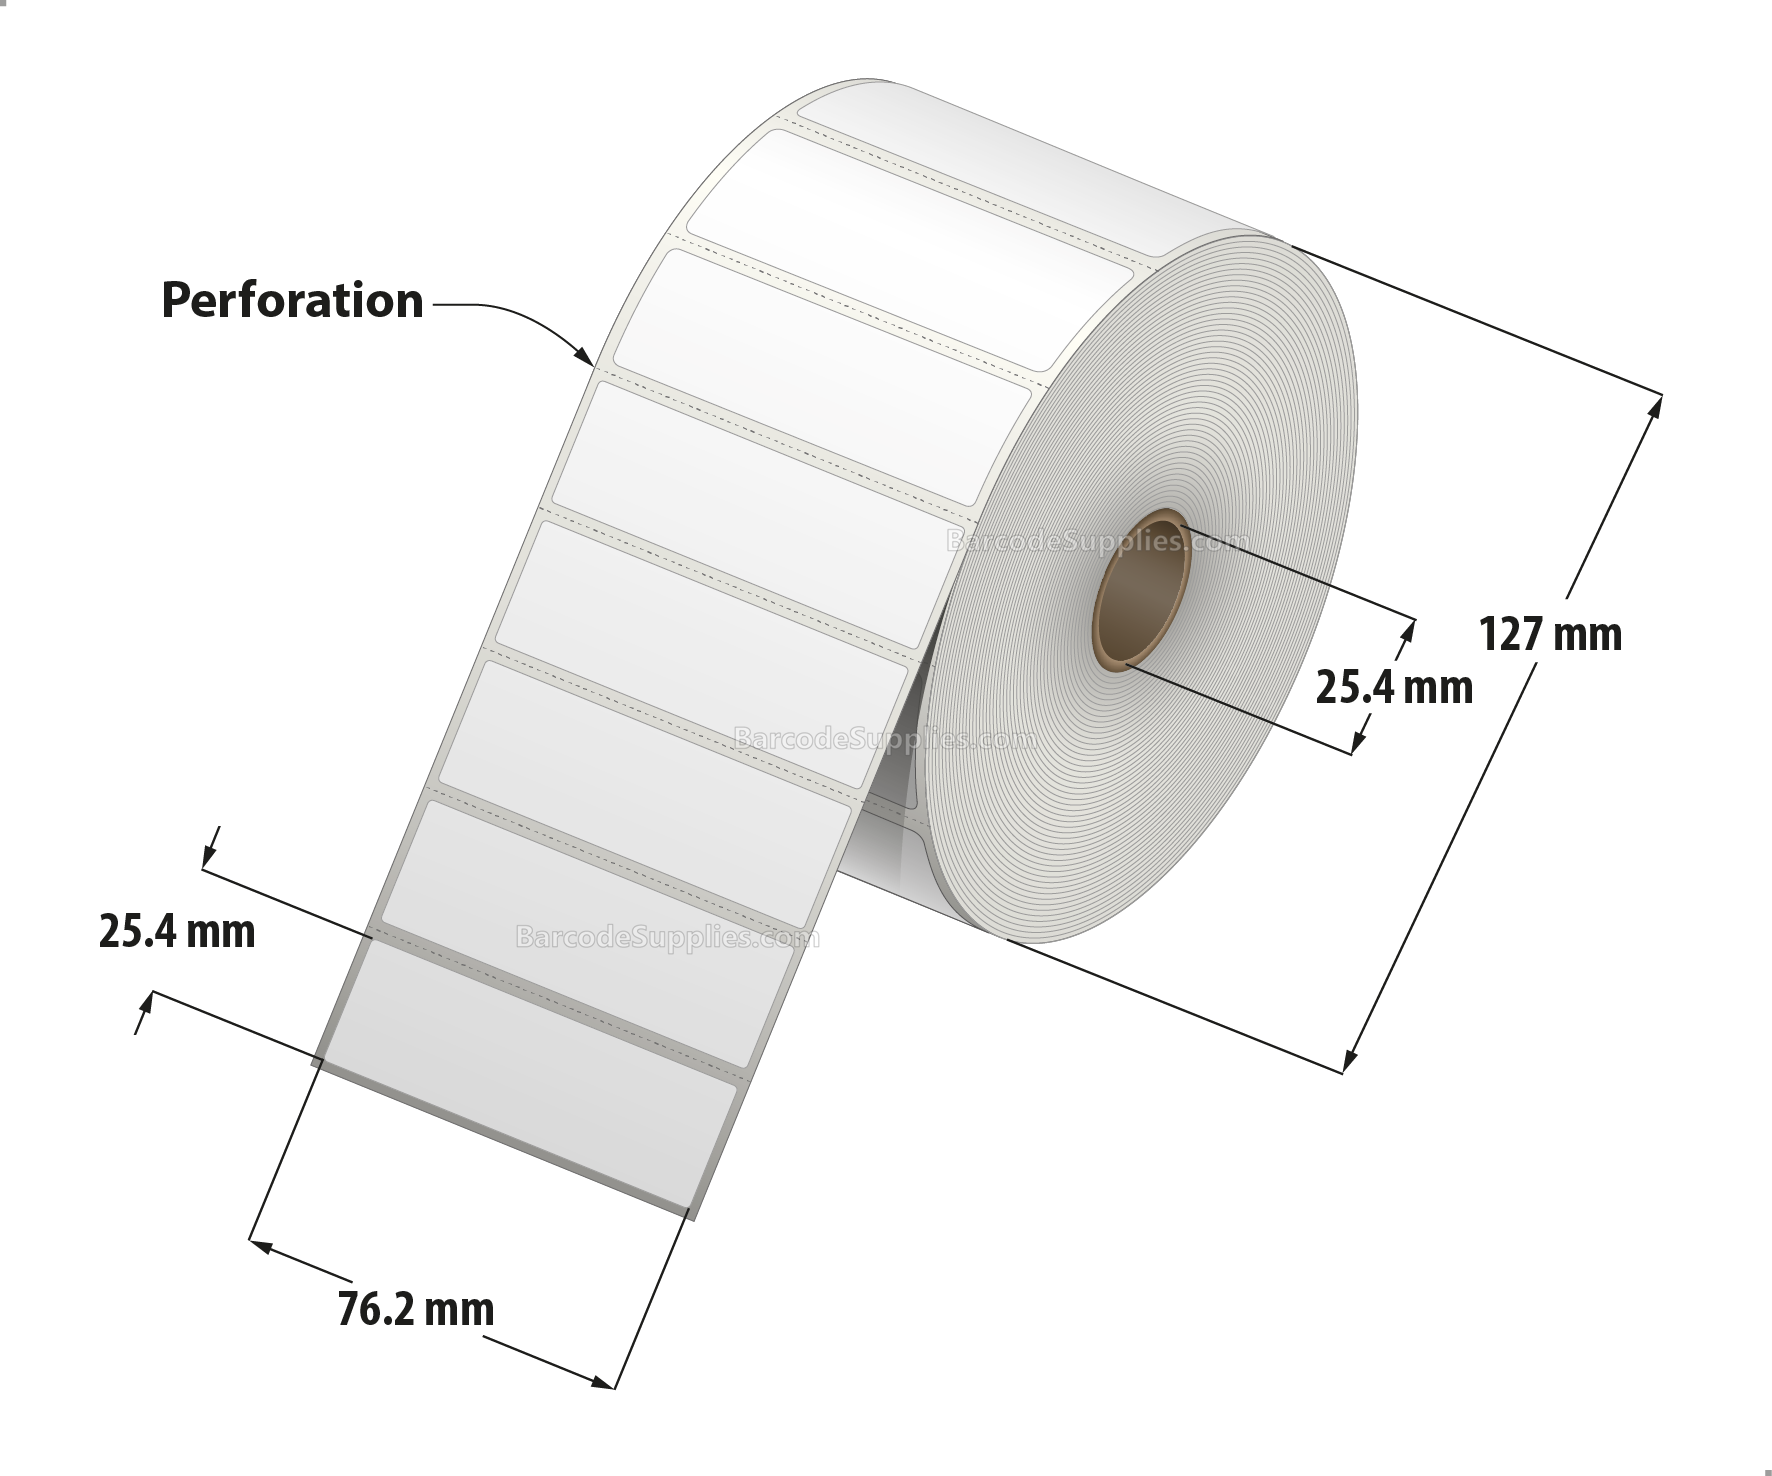 3 x 1 Direct Thermal White Labels With Rubber Adhesive - Perforated - 2340 Labels Per Roll - Carton Of 12 Rolls - 28080 Labels Total - MPN: RDT5-300100-1P